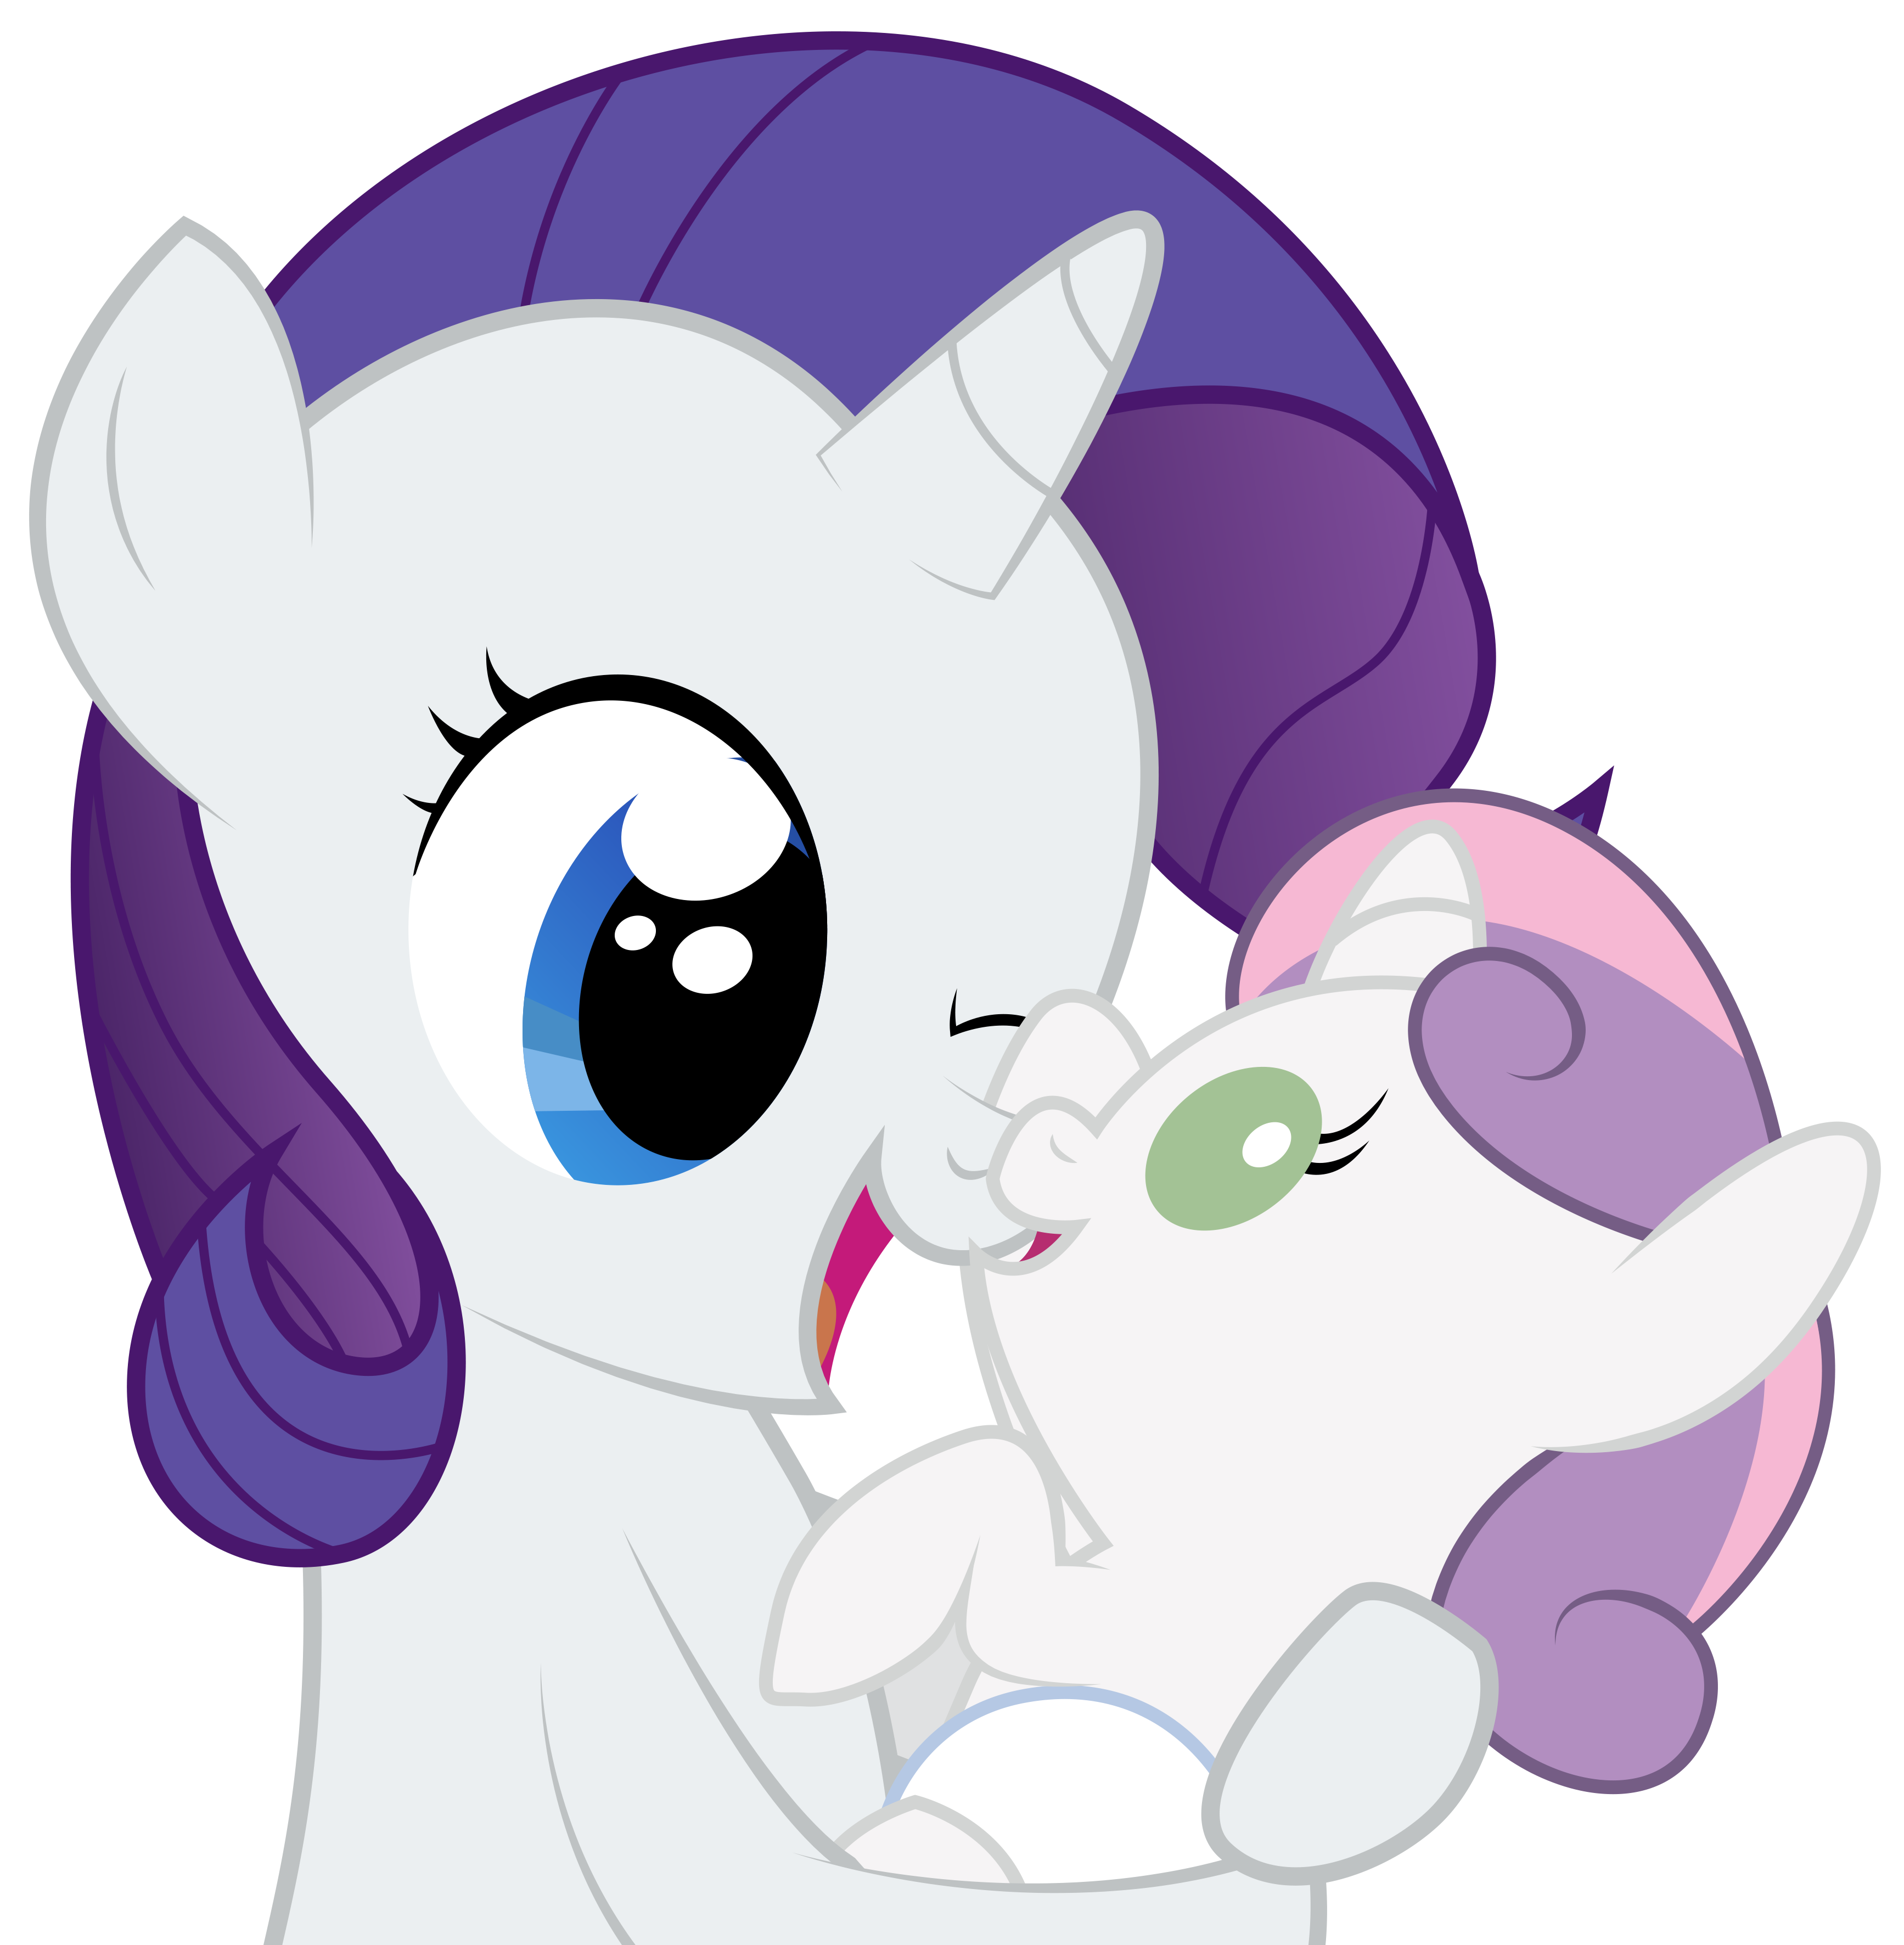 360416__safe_rarity_vector_sweetie+belle_filly_foal_diaper_baby+pony_diasweetes_artist-colon-replaymasteroftime.png